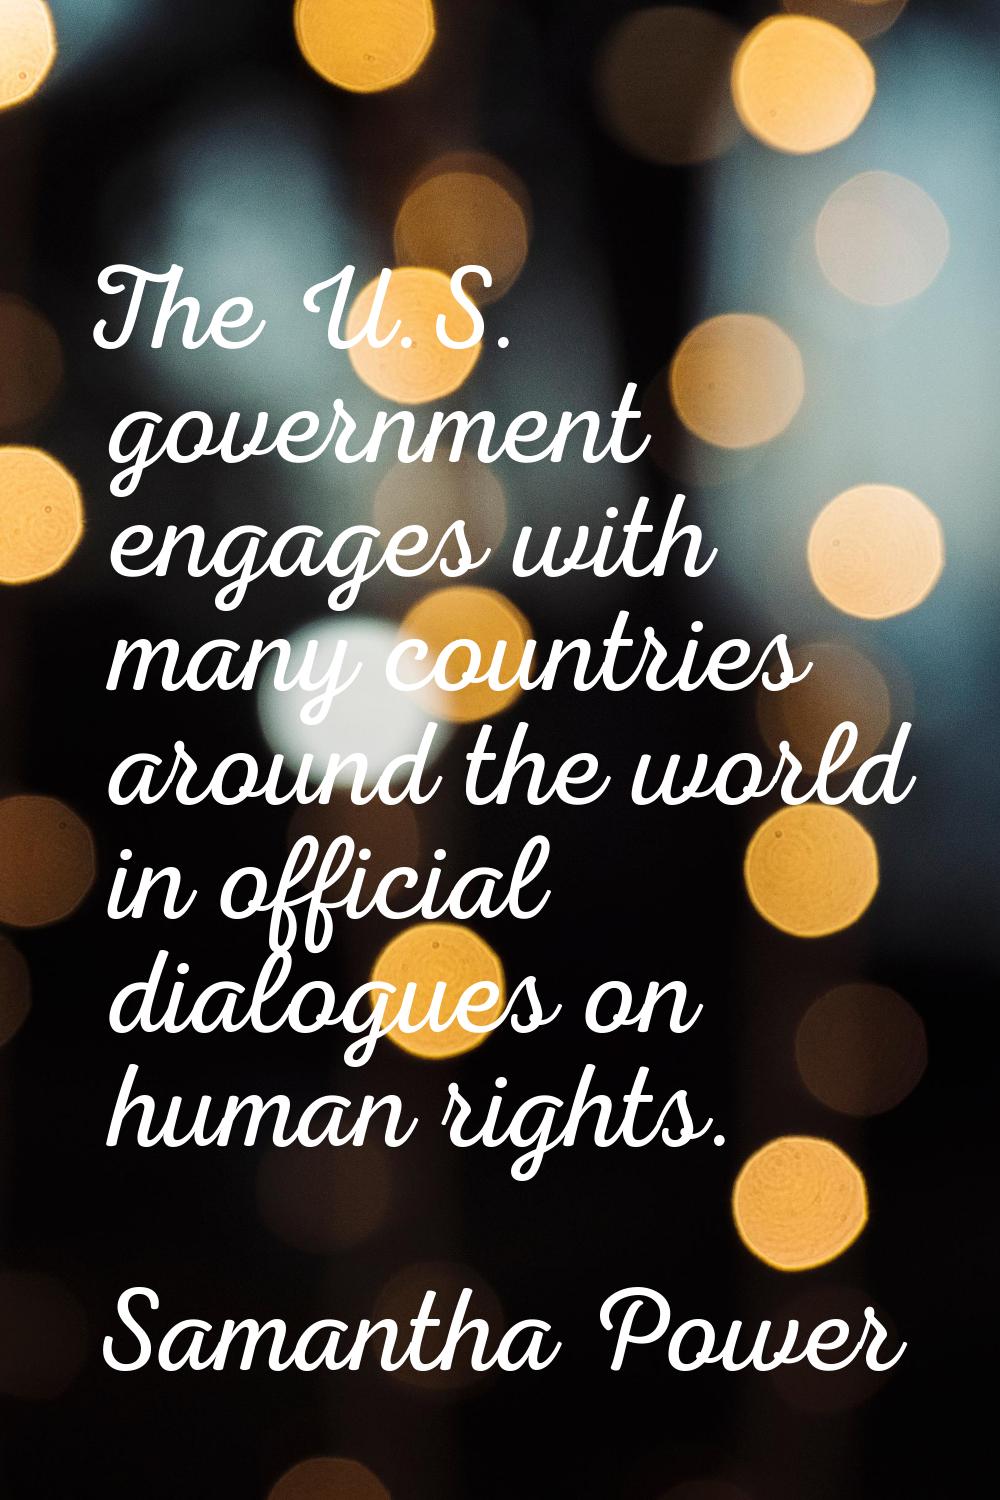 The U.S. government engages with many countries around the world in official dialogues on human rig